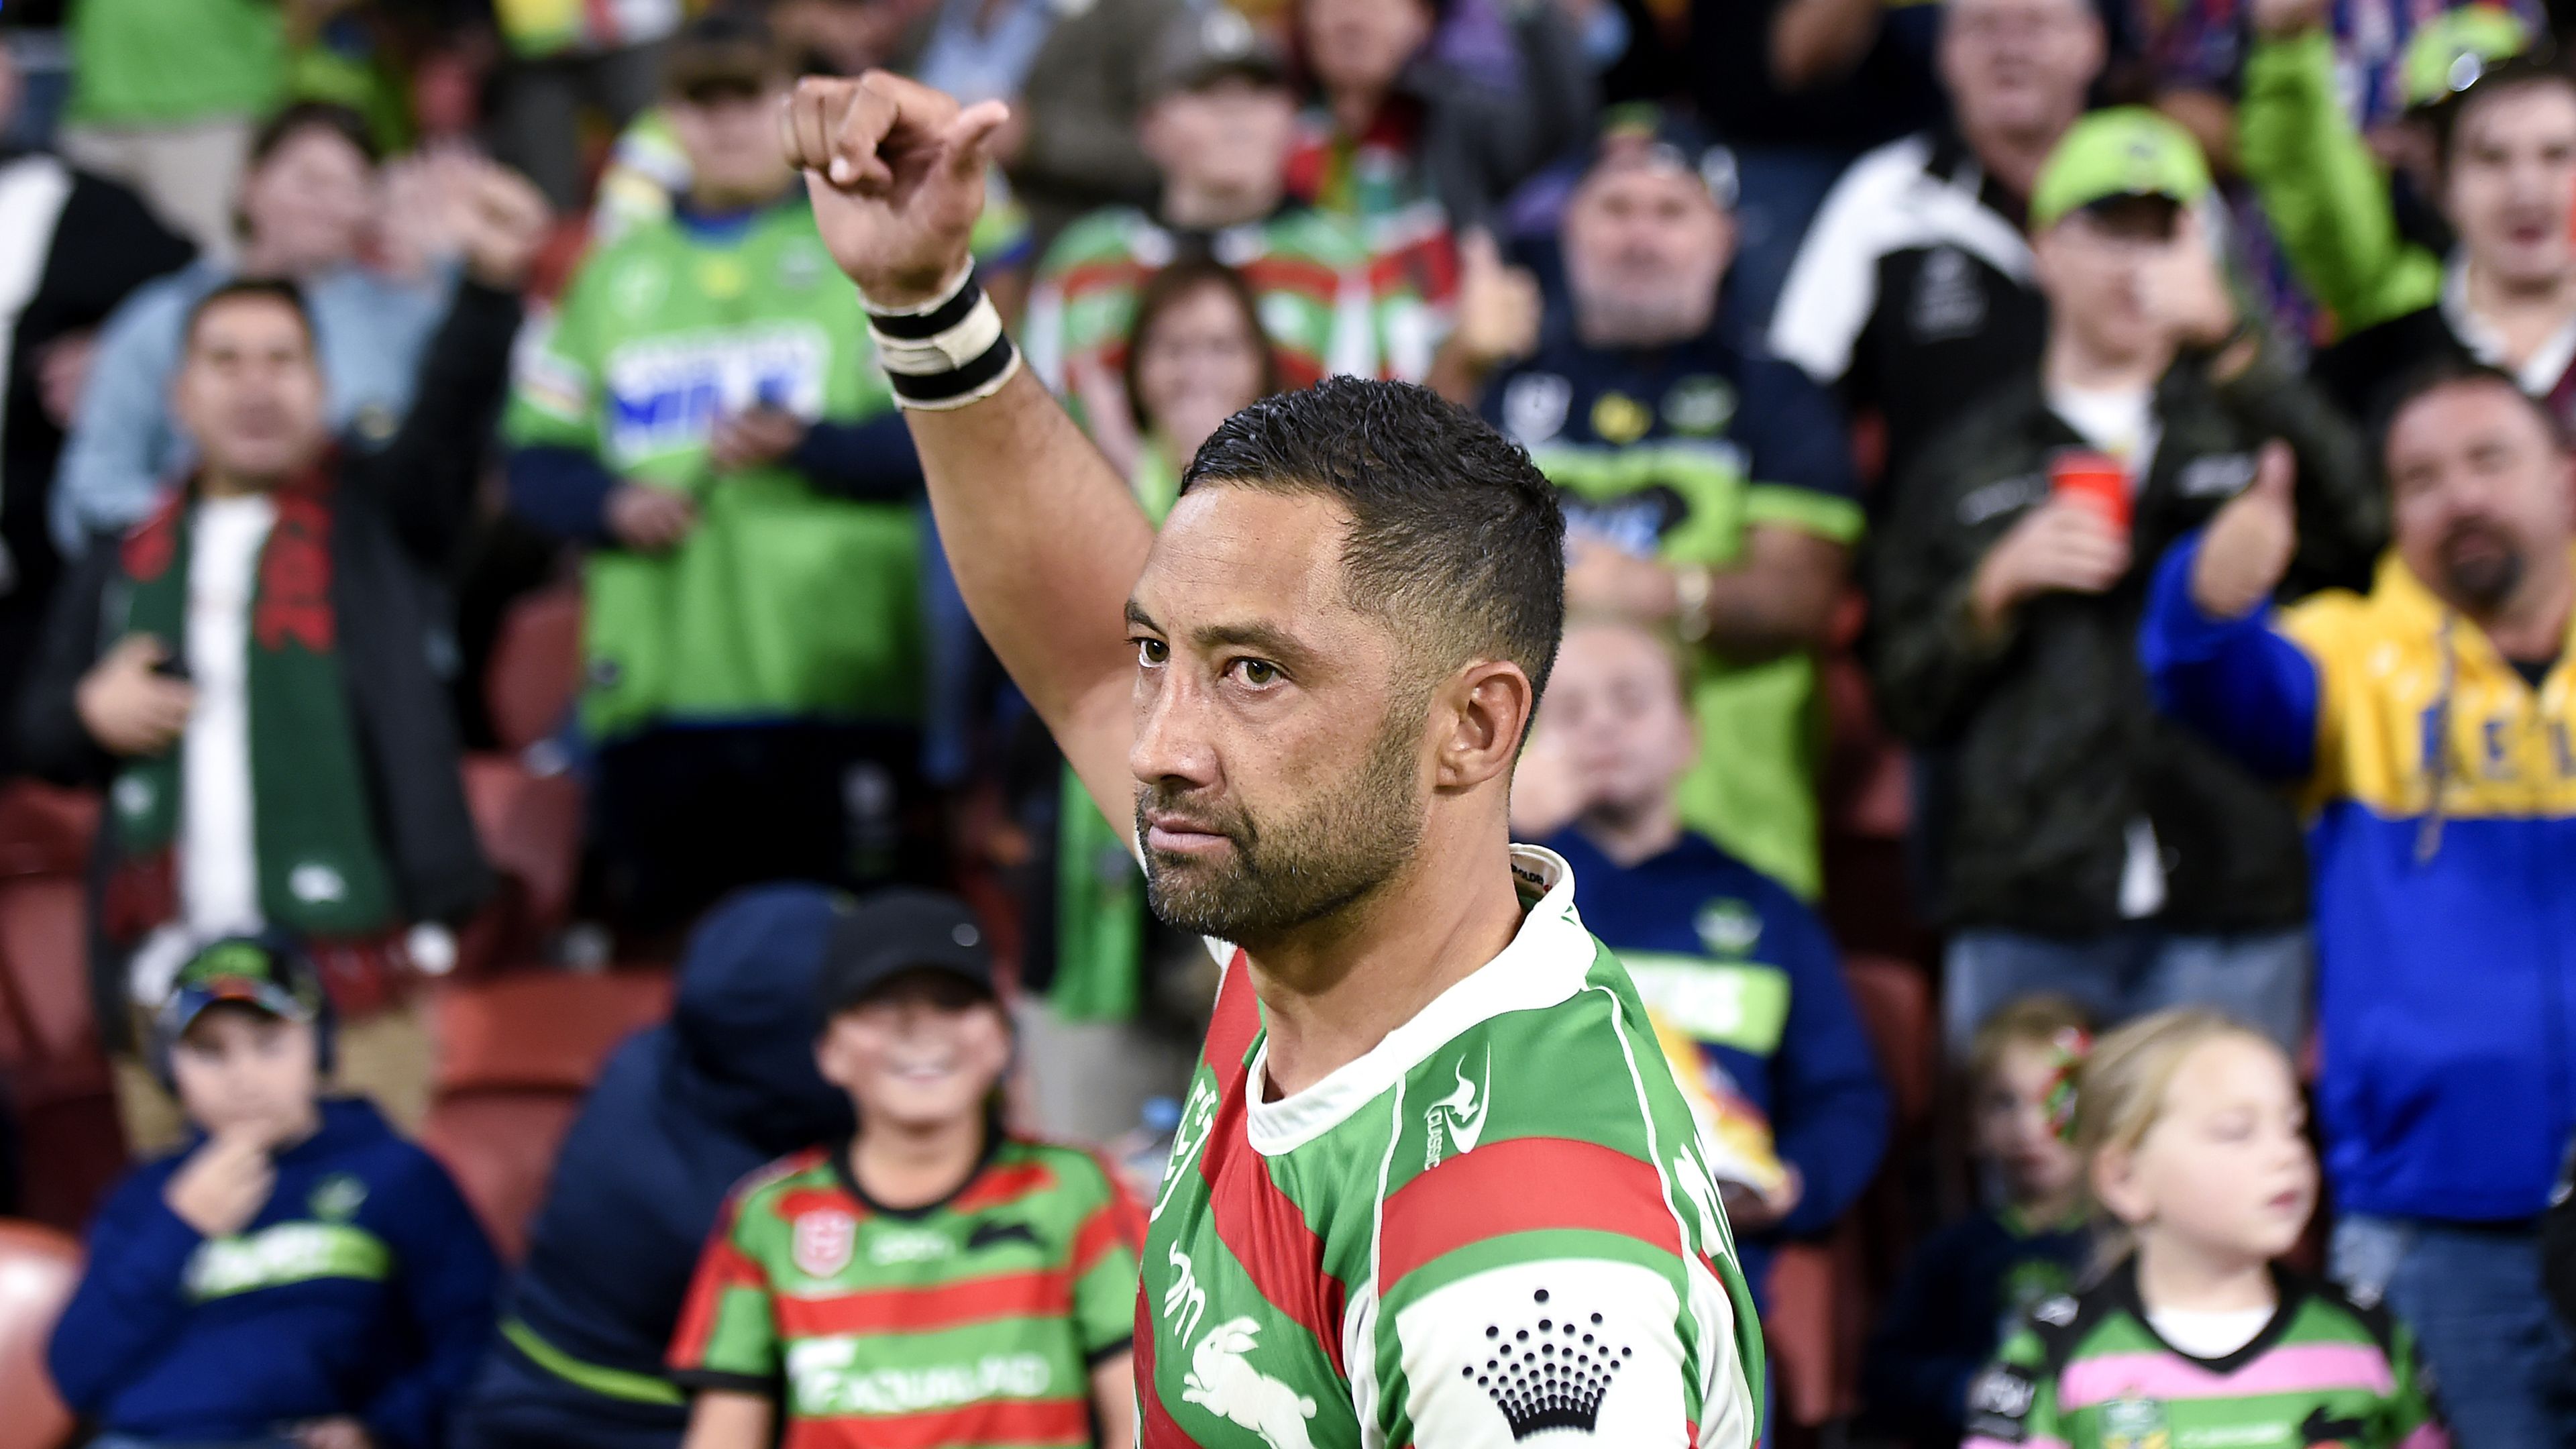 Benji Marshall announces retirement from professional rugby league